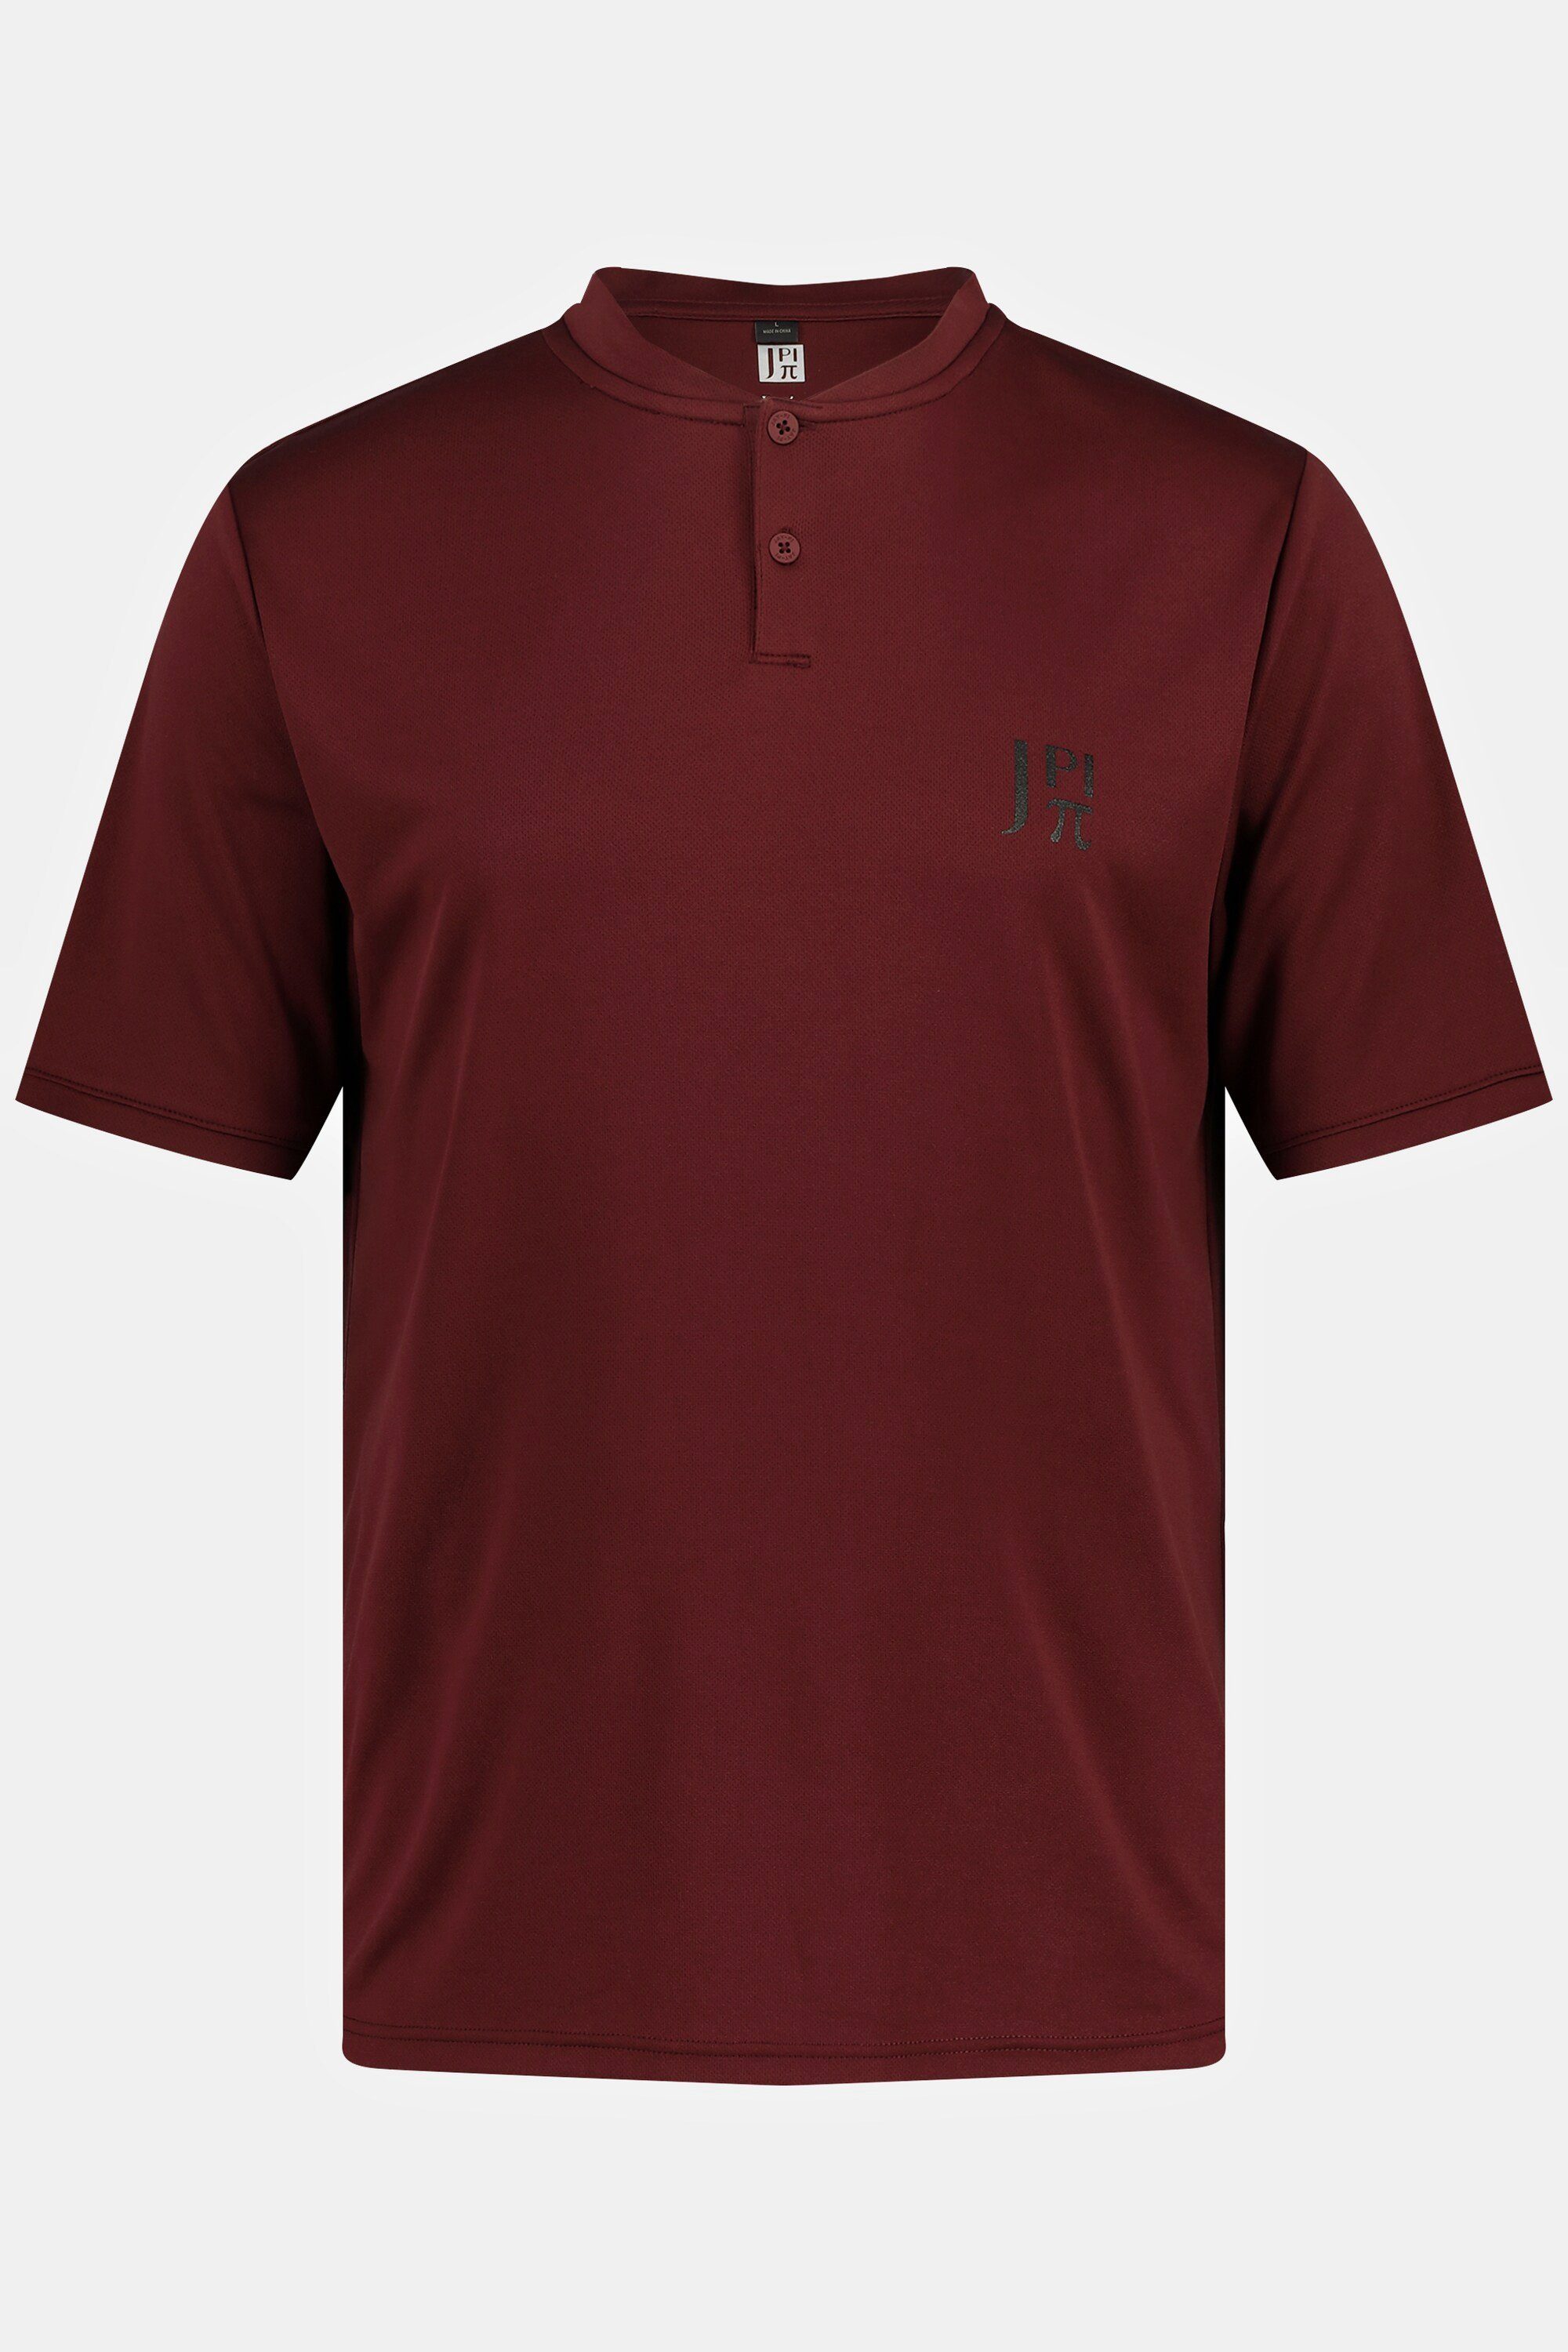 JP1880 rost Halbarm QuickDry Funktions-Henley T-Shirt